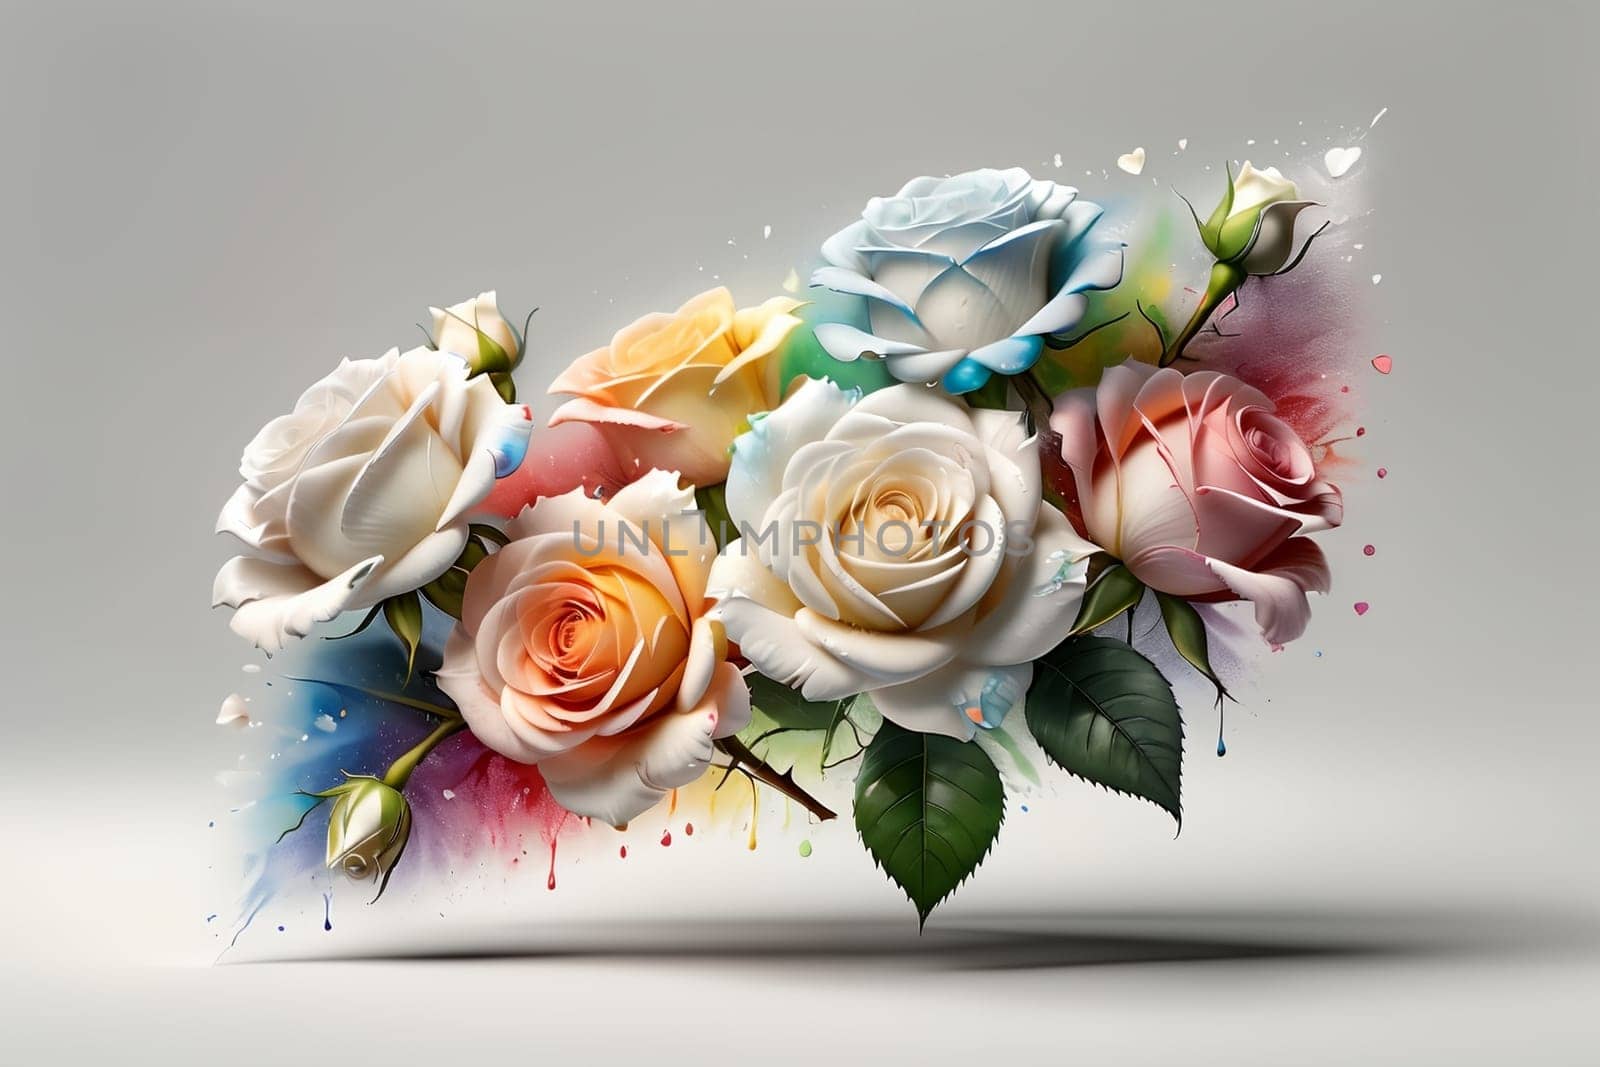 bouquet of bright multi-colored roses on a light background .